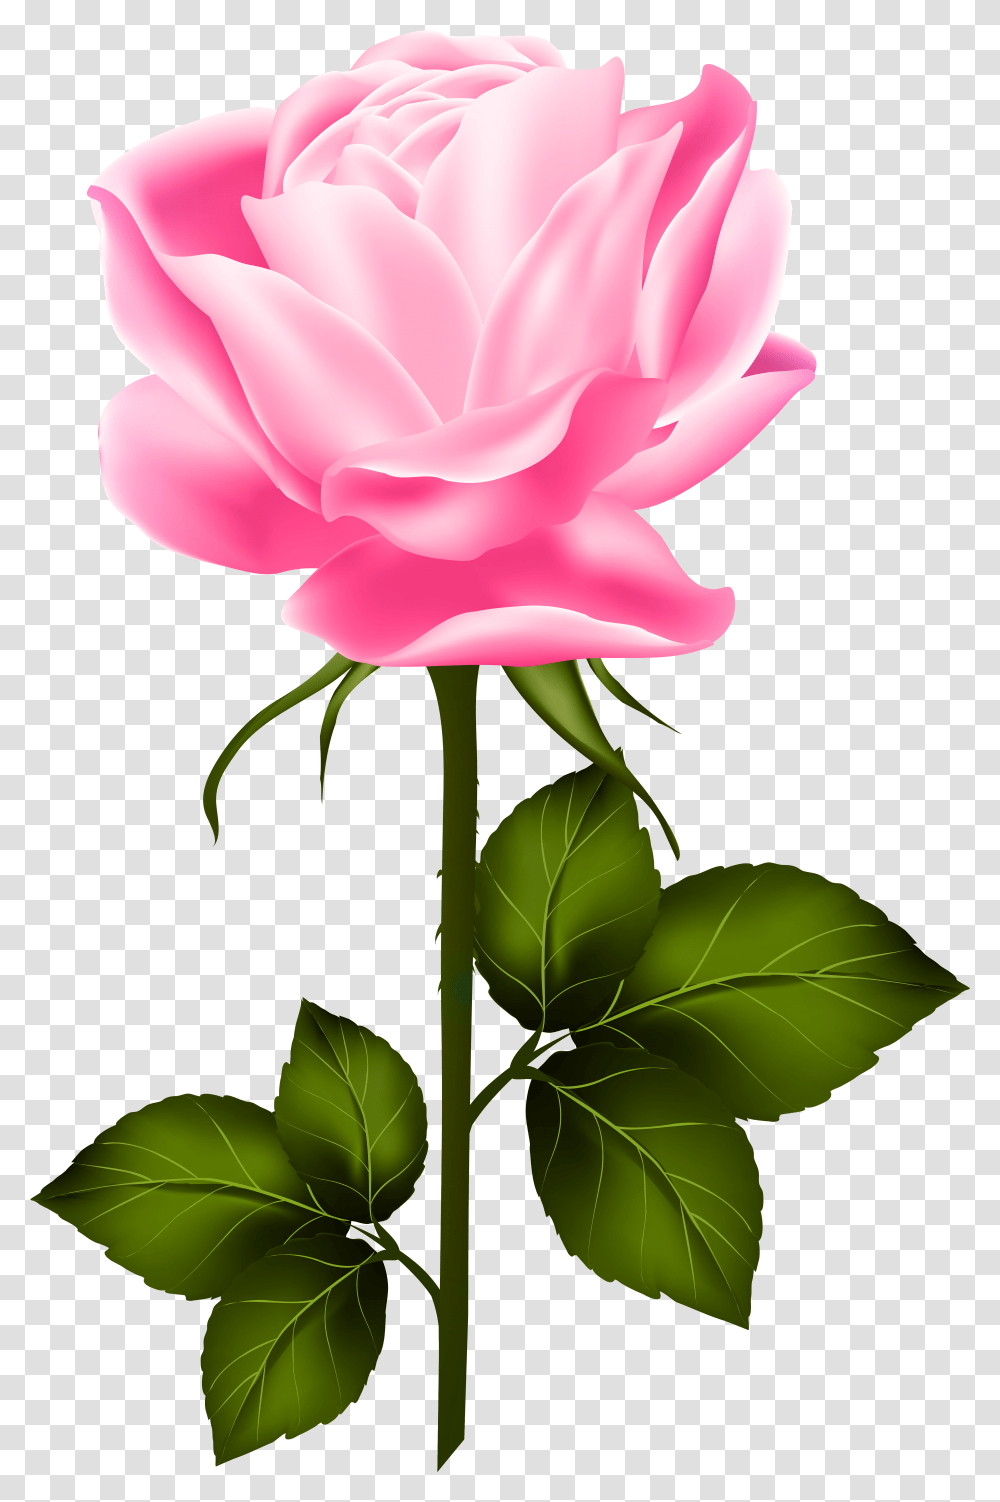 Library Of Pink Flower With Stem Banner Royalty Free Stock Pink Rose With Stem Transparent Png